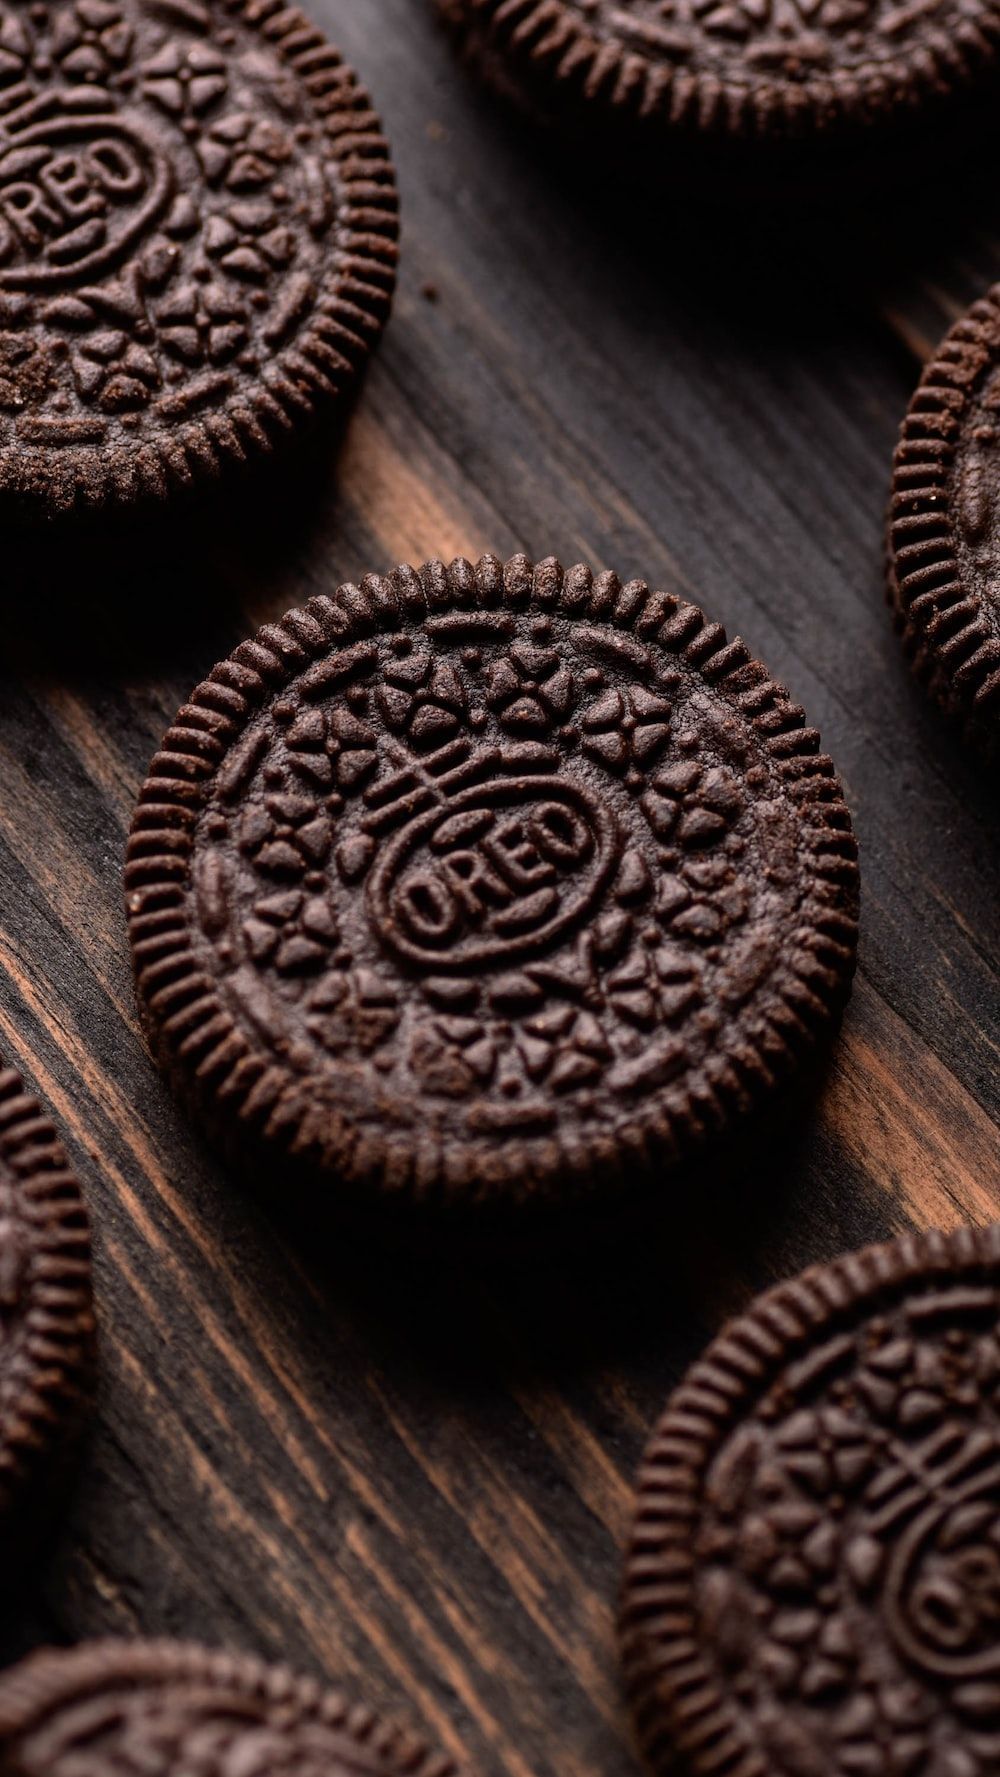 Chocolate sandwich cookies on a wooden table - Oreo